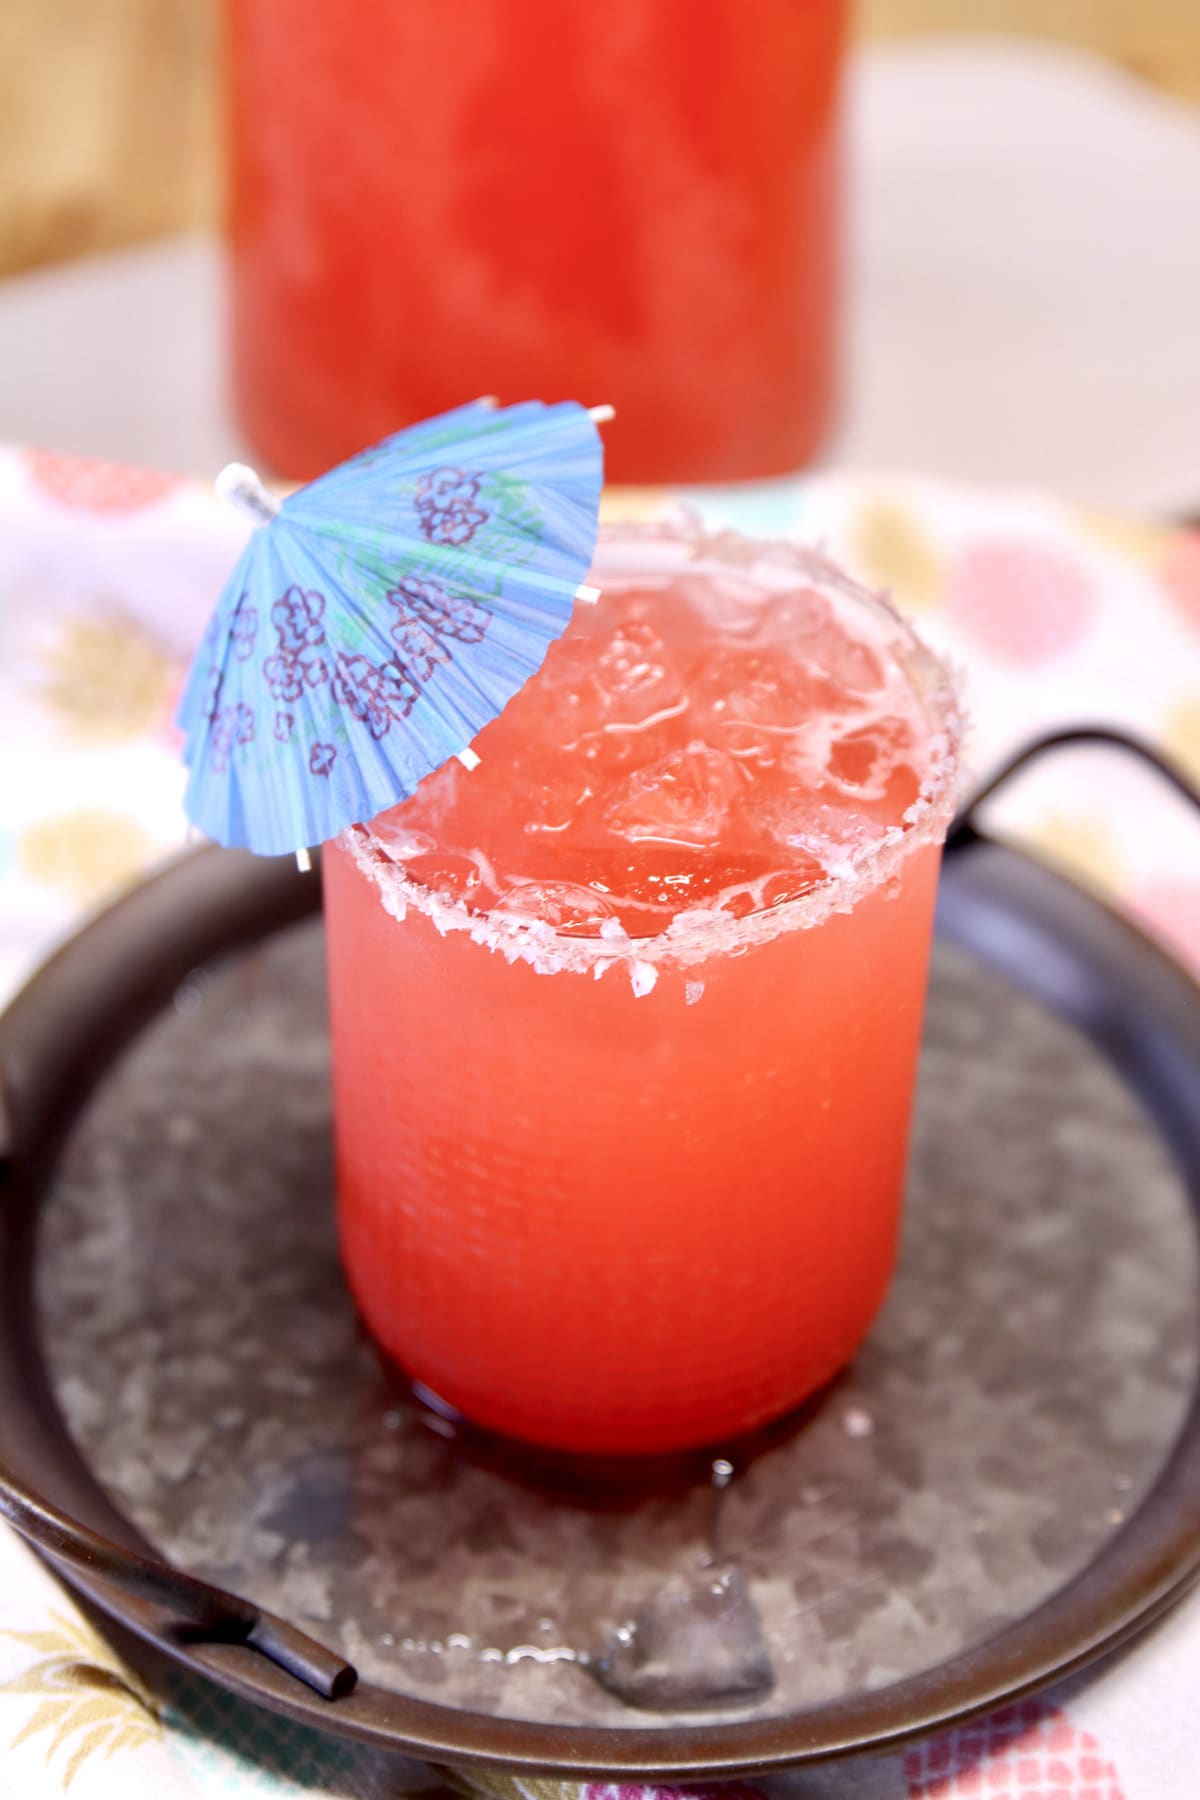 Glass of punch with umbrella.